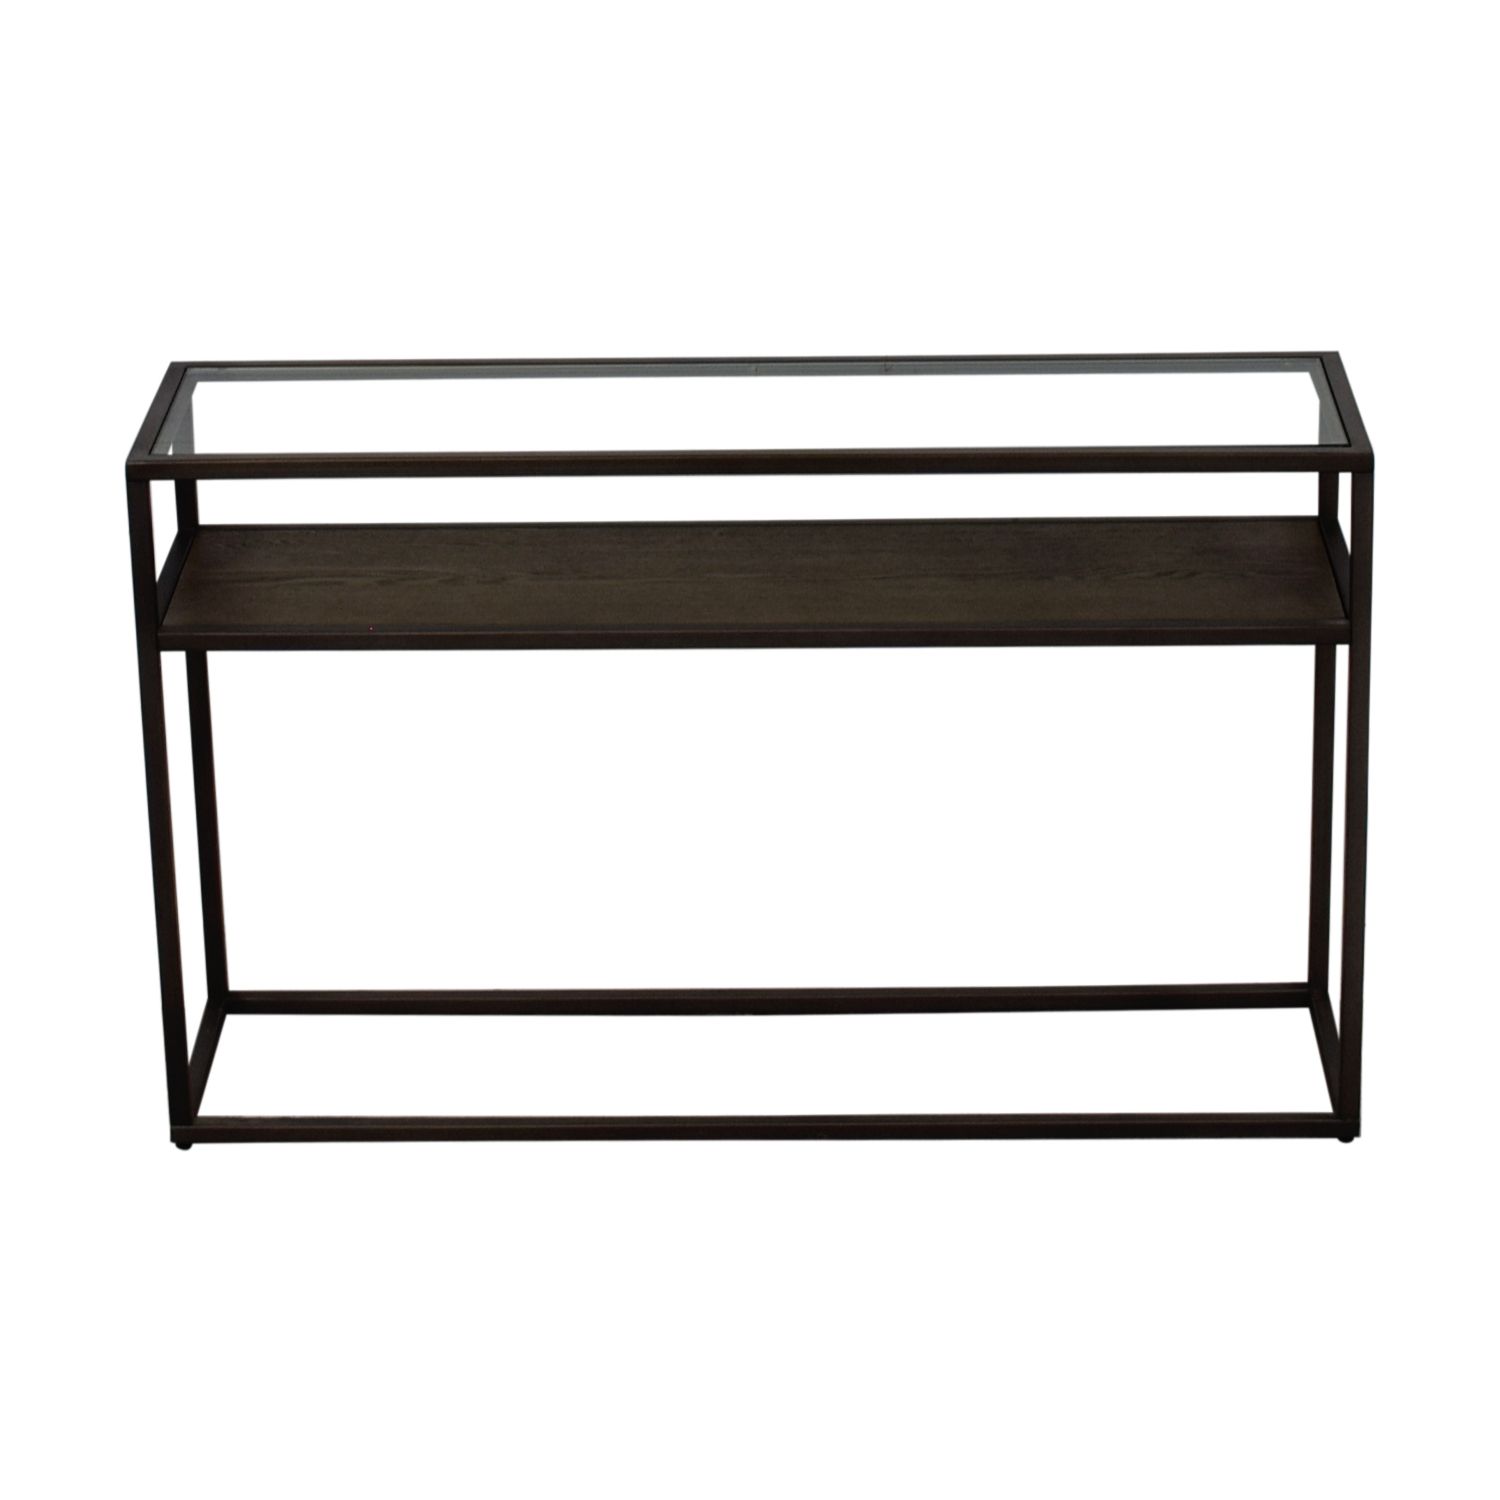 [%79% Off – Crate & Barrel Crate & Barrel Switch Glass Wood And Metal With Regard To 2017 Switch Console Tables|switch Console Tables Intended For Preferred 79% Off – Crate & Barrel Crate & Barrel Switch Glass Wood And Metal|most Current Switch Console Tables With Regard To 79% Off – Crate & Barrel Crate & Barrel Switch Glass Wood And Metal|popular 79% Off – Crate & Barrel Crate & Barrel Switch Glass Wood And Metal With Switch Console Tables%] (View 4 of 20)